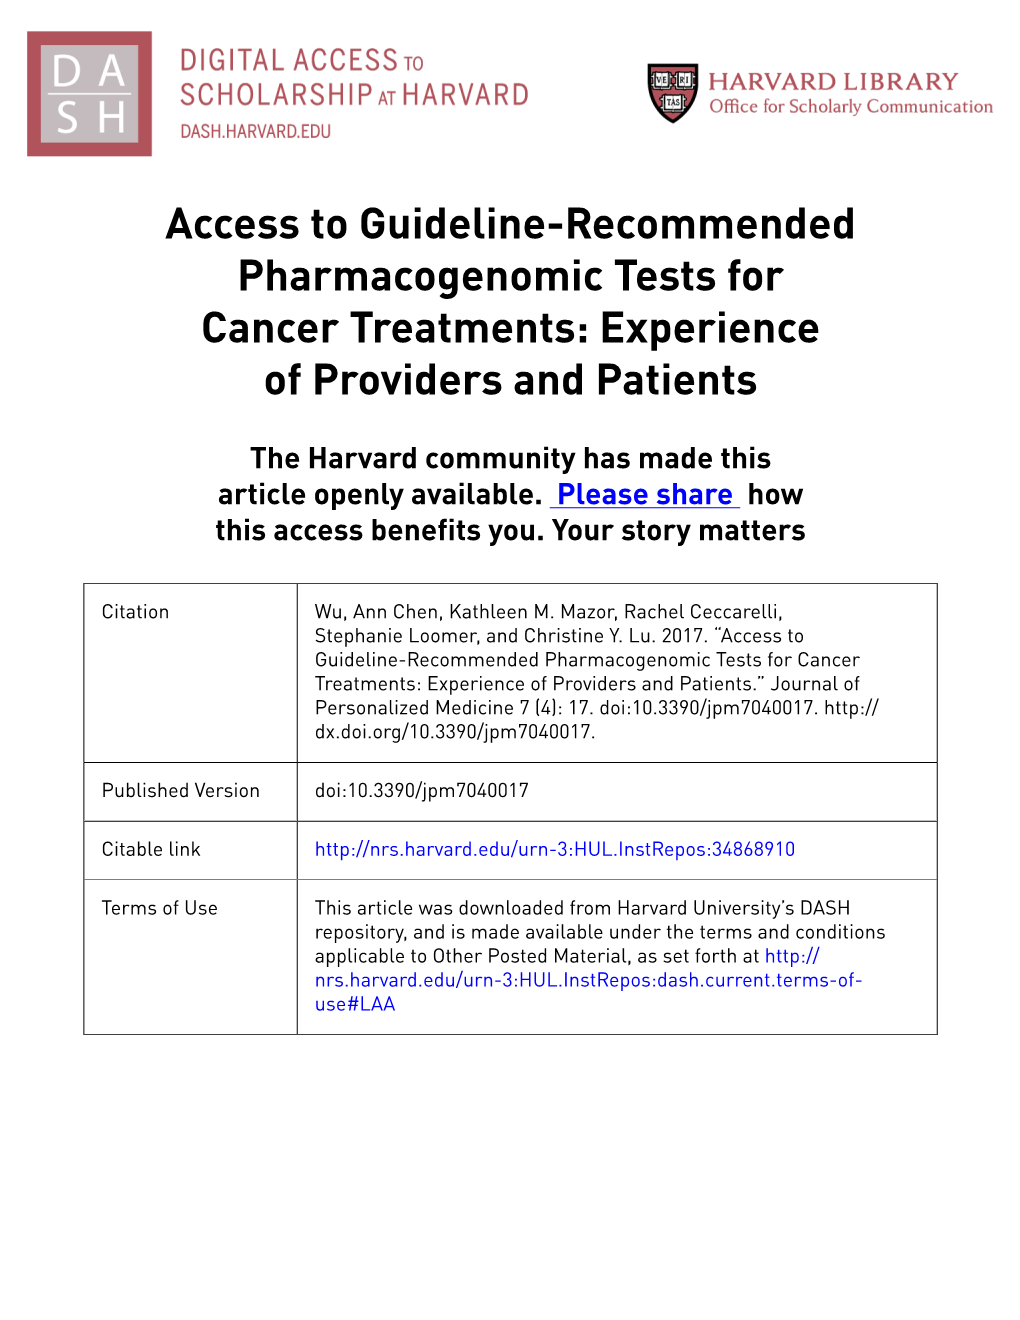 Access to Guideline-Recommended Pharmacogenomic Tests for Cancer Treatments: Experience of Providers and Patients